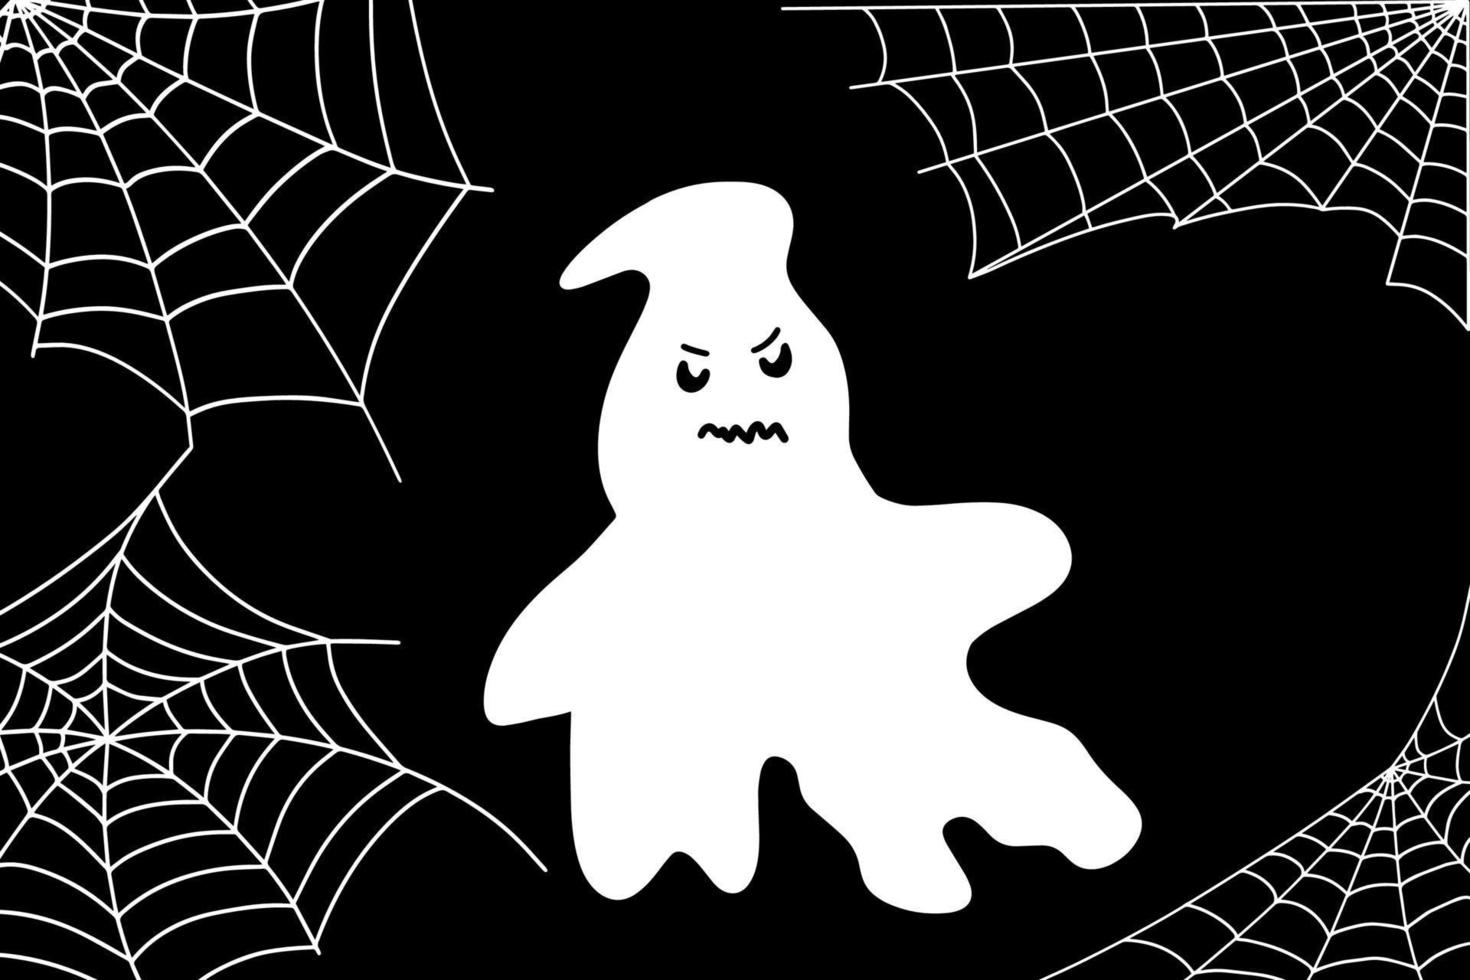 Spider web set isolated on dark background. Creepy Halloween web. Halloween white ghost party element vector illustration. Ghost vector with a scary face.